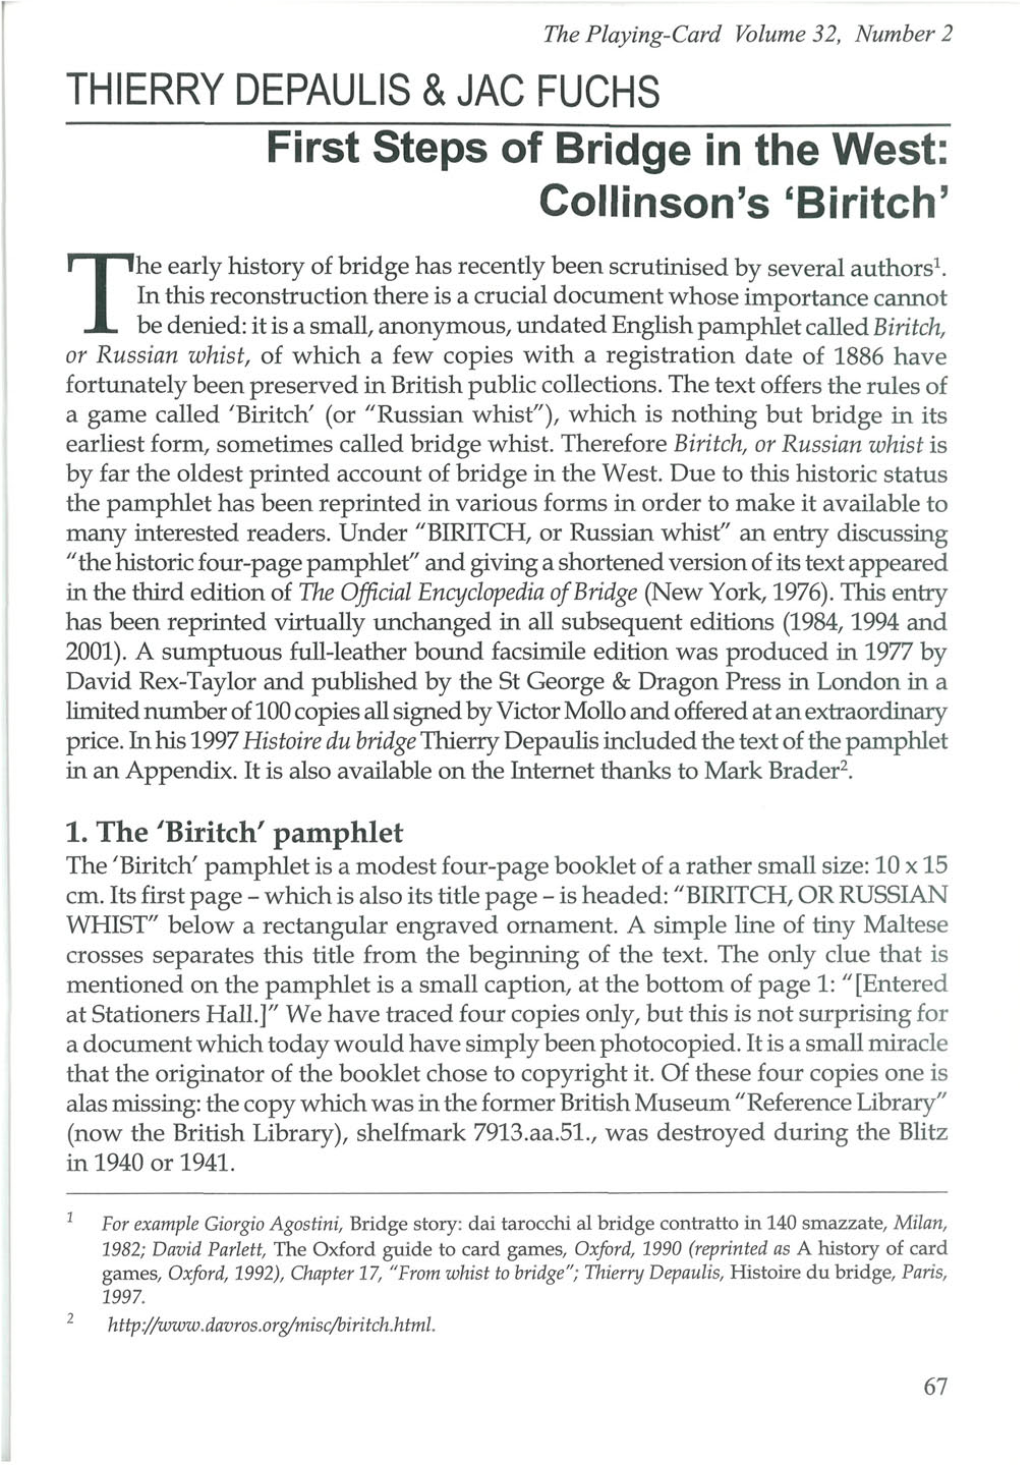 Collinson's 'Biritch' He Early History of Bridge Has Recently Been Scrutinised by Several Authors1